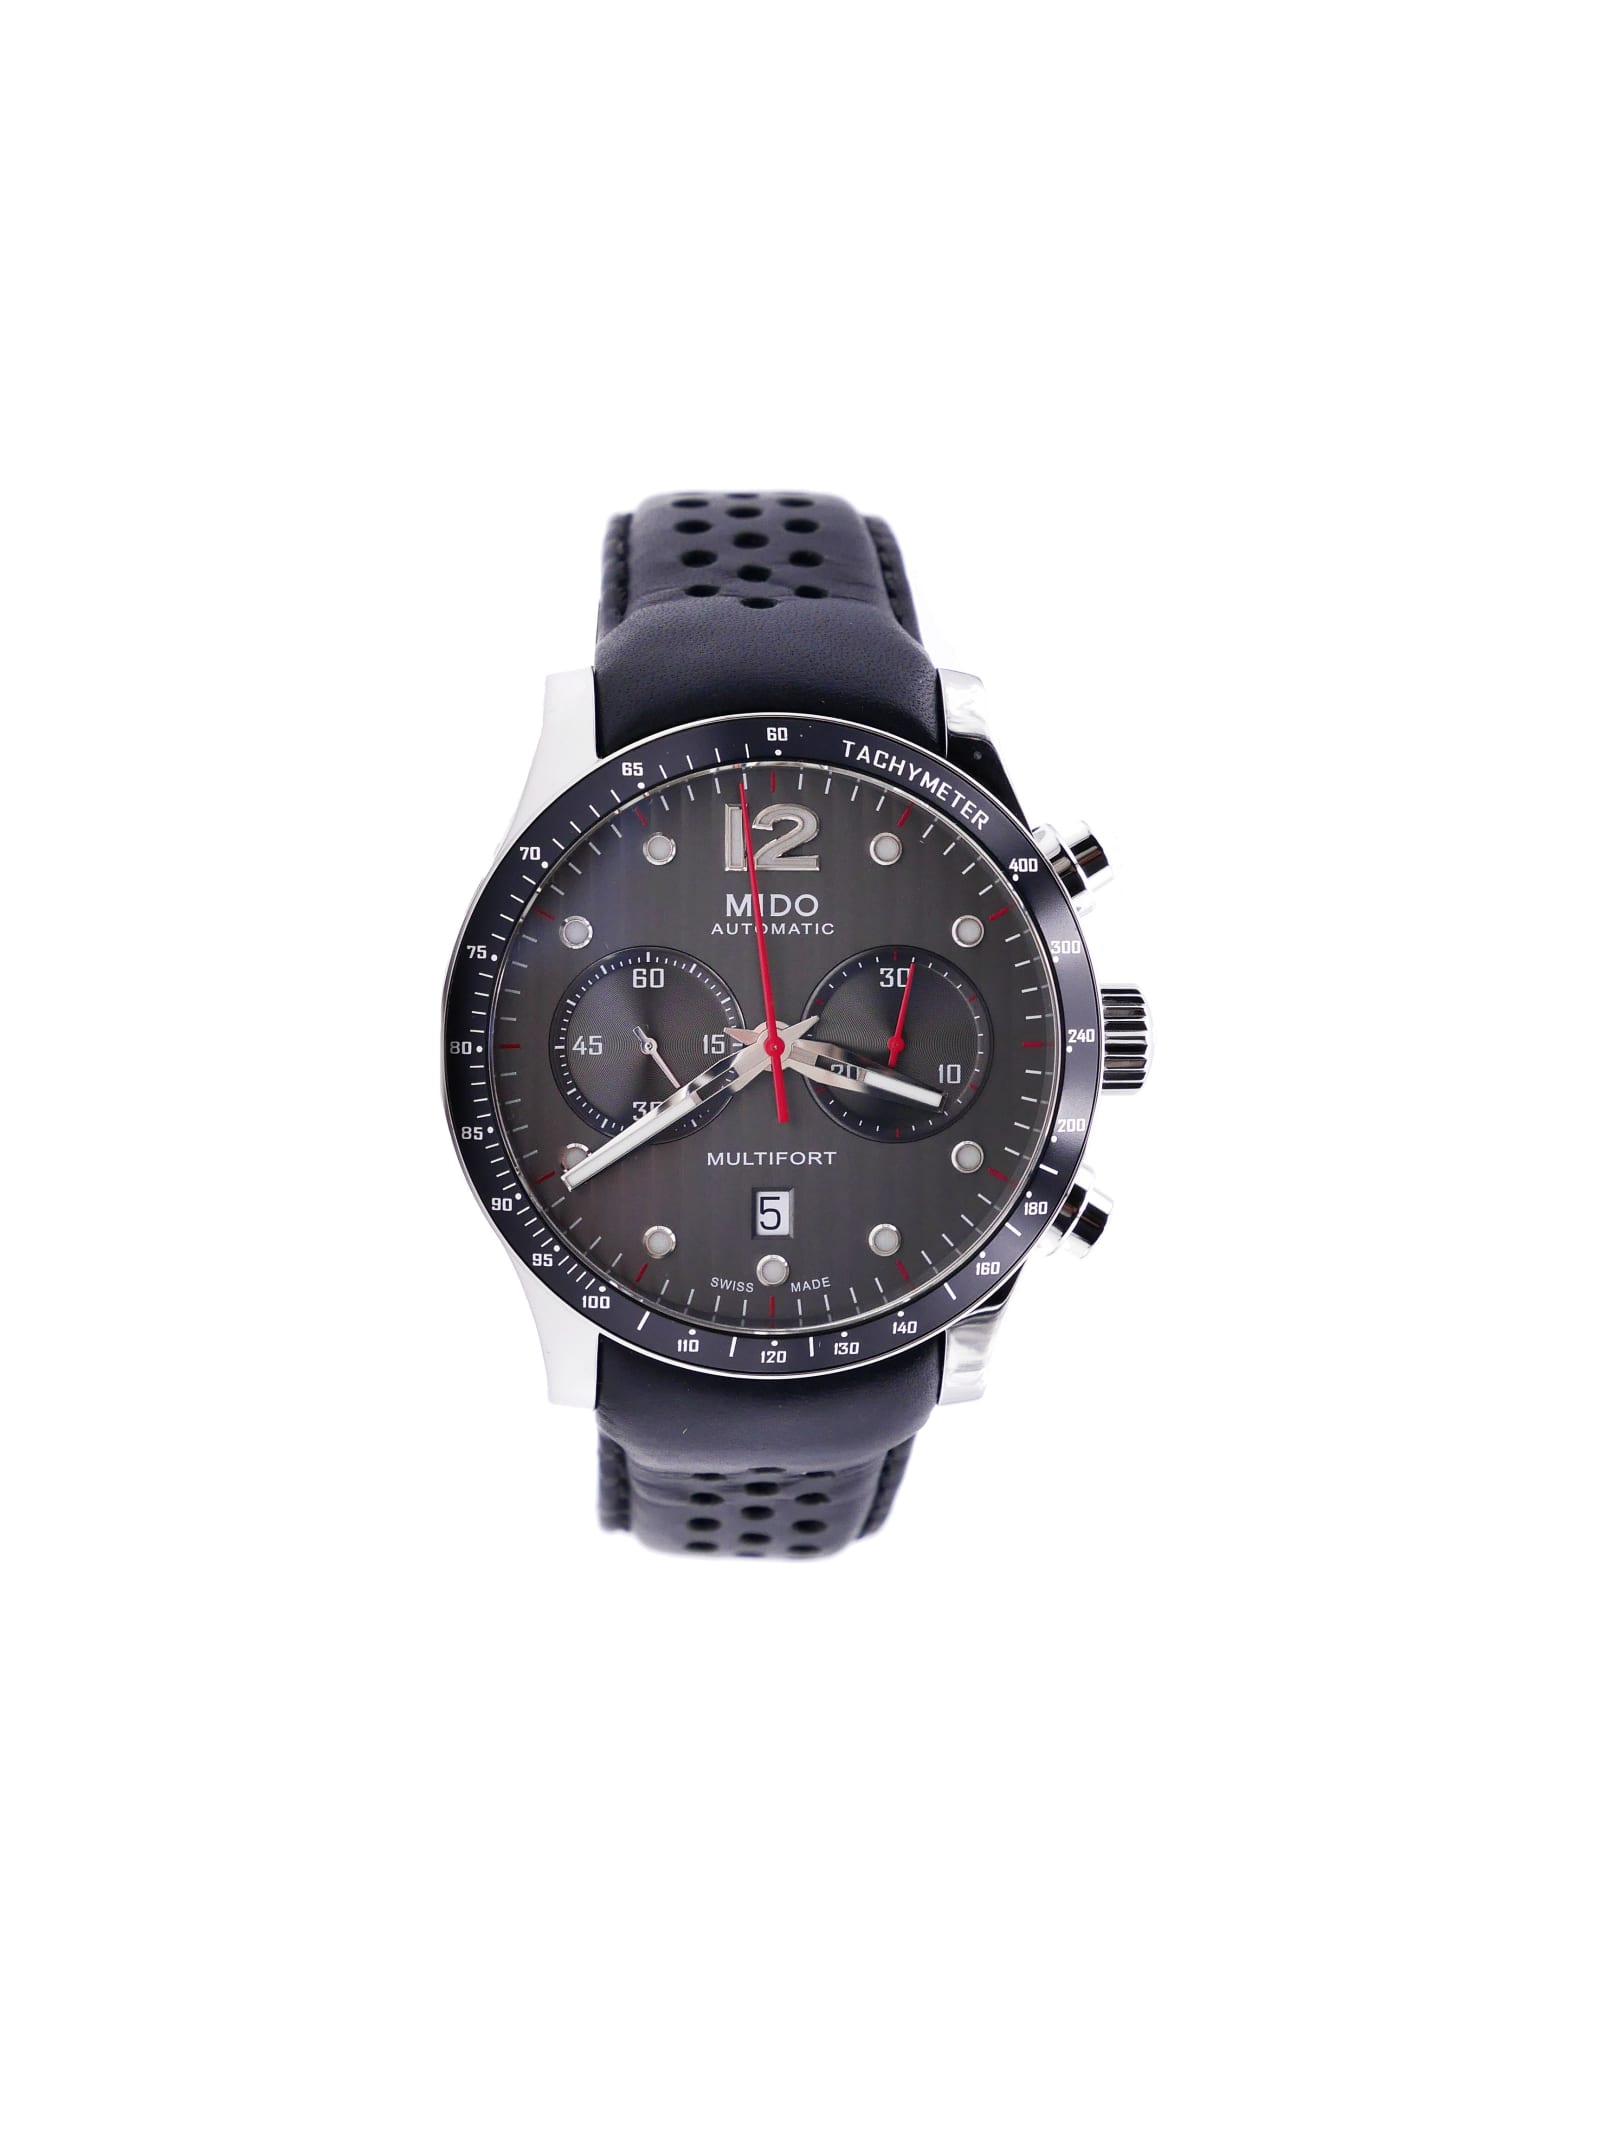 MIDO Multifort Chronograph Watches